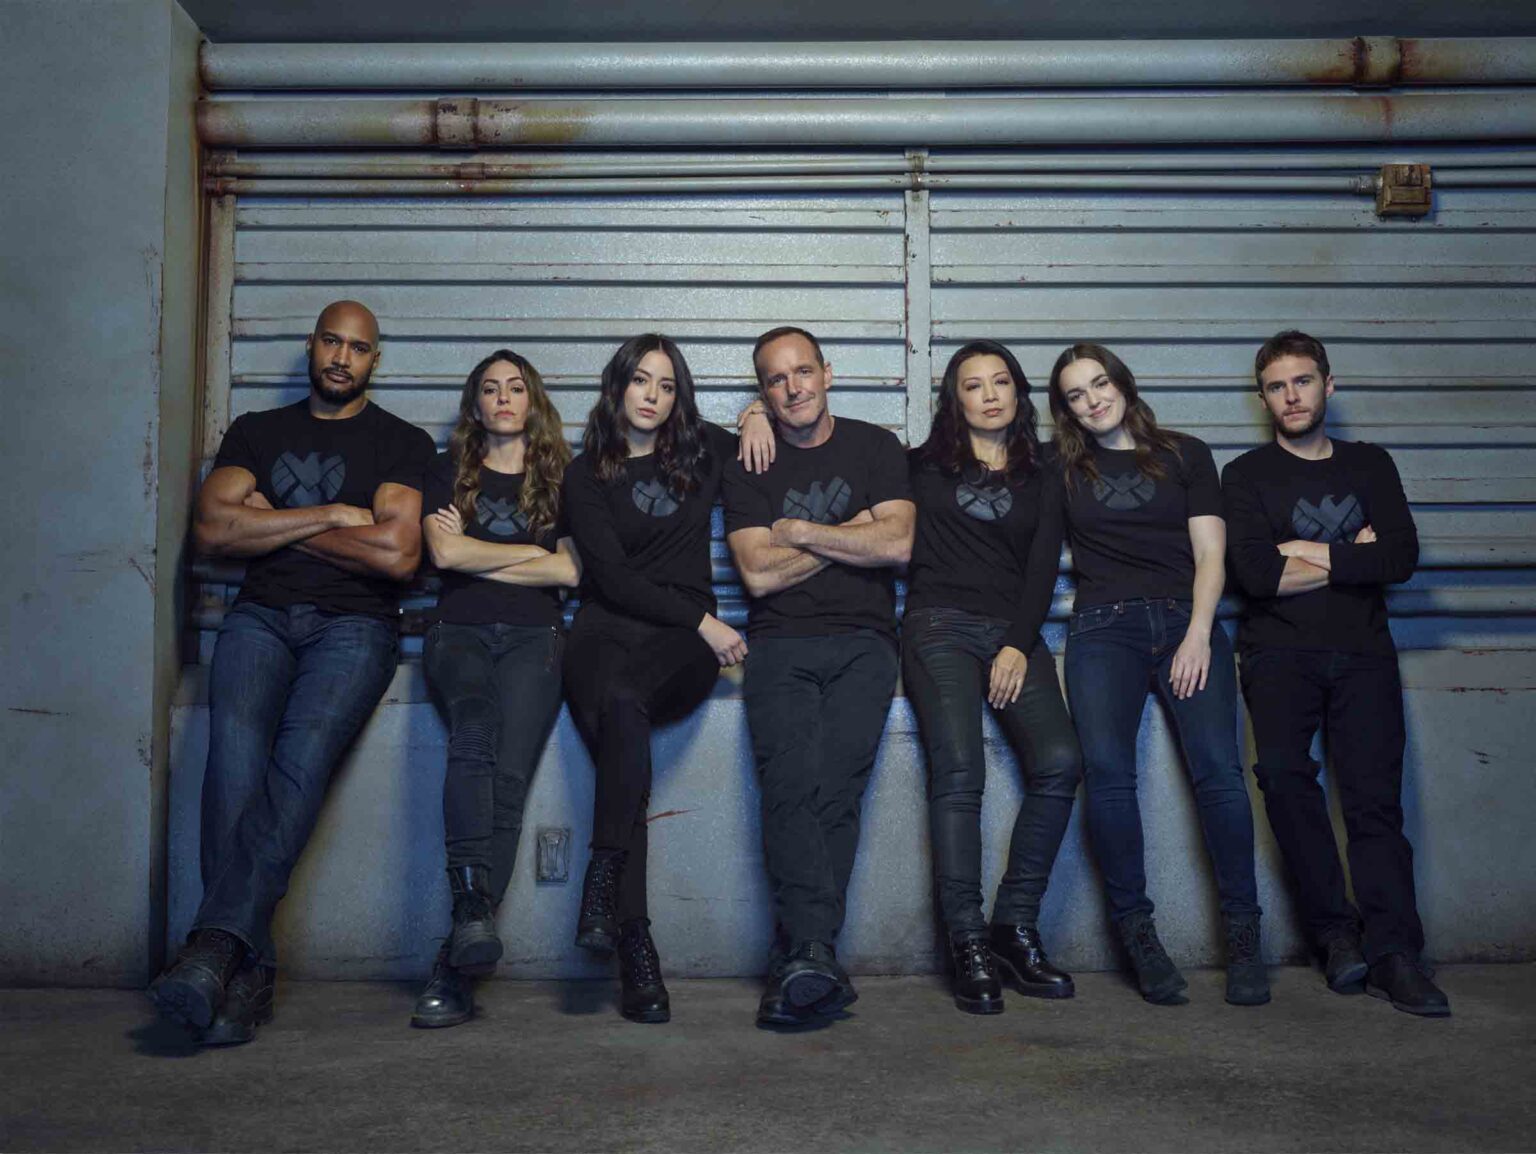 'Agents of S.H.I.E.L.D.' managed 7 seasons before, it was time for the show to end. Here's where to find your favorite cast members.